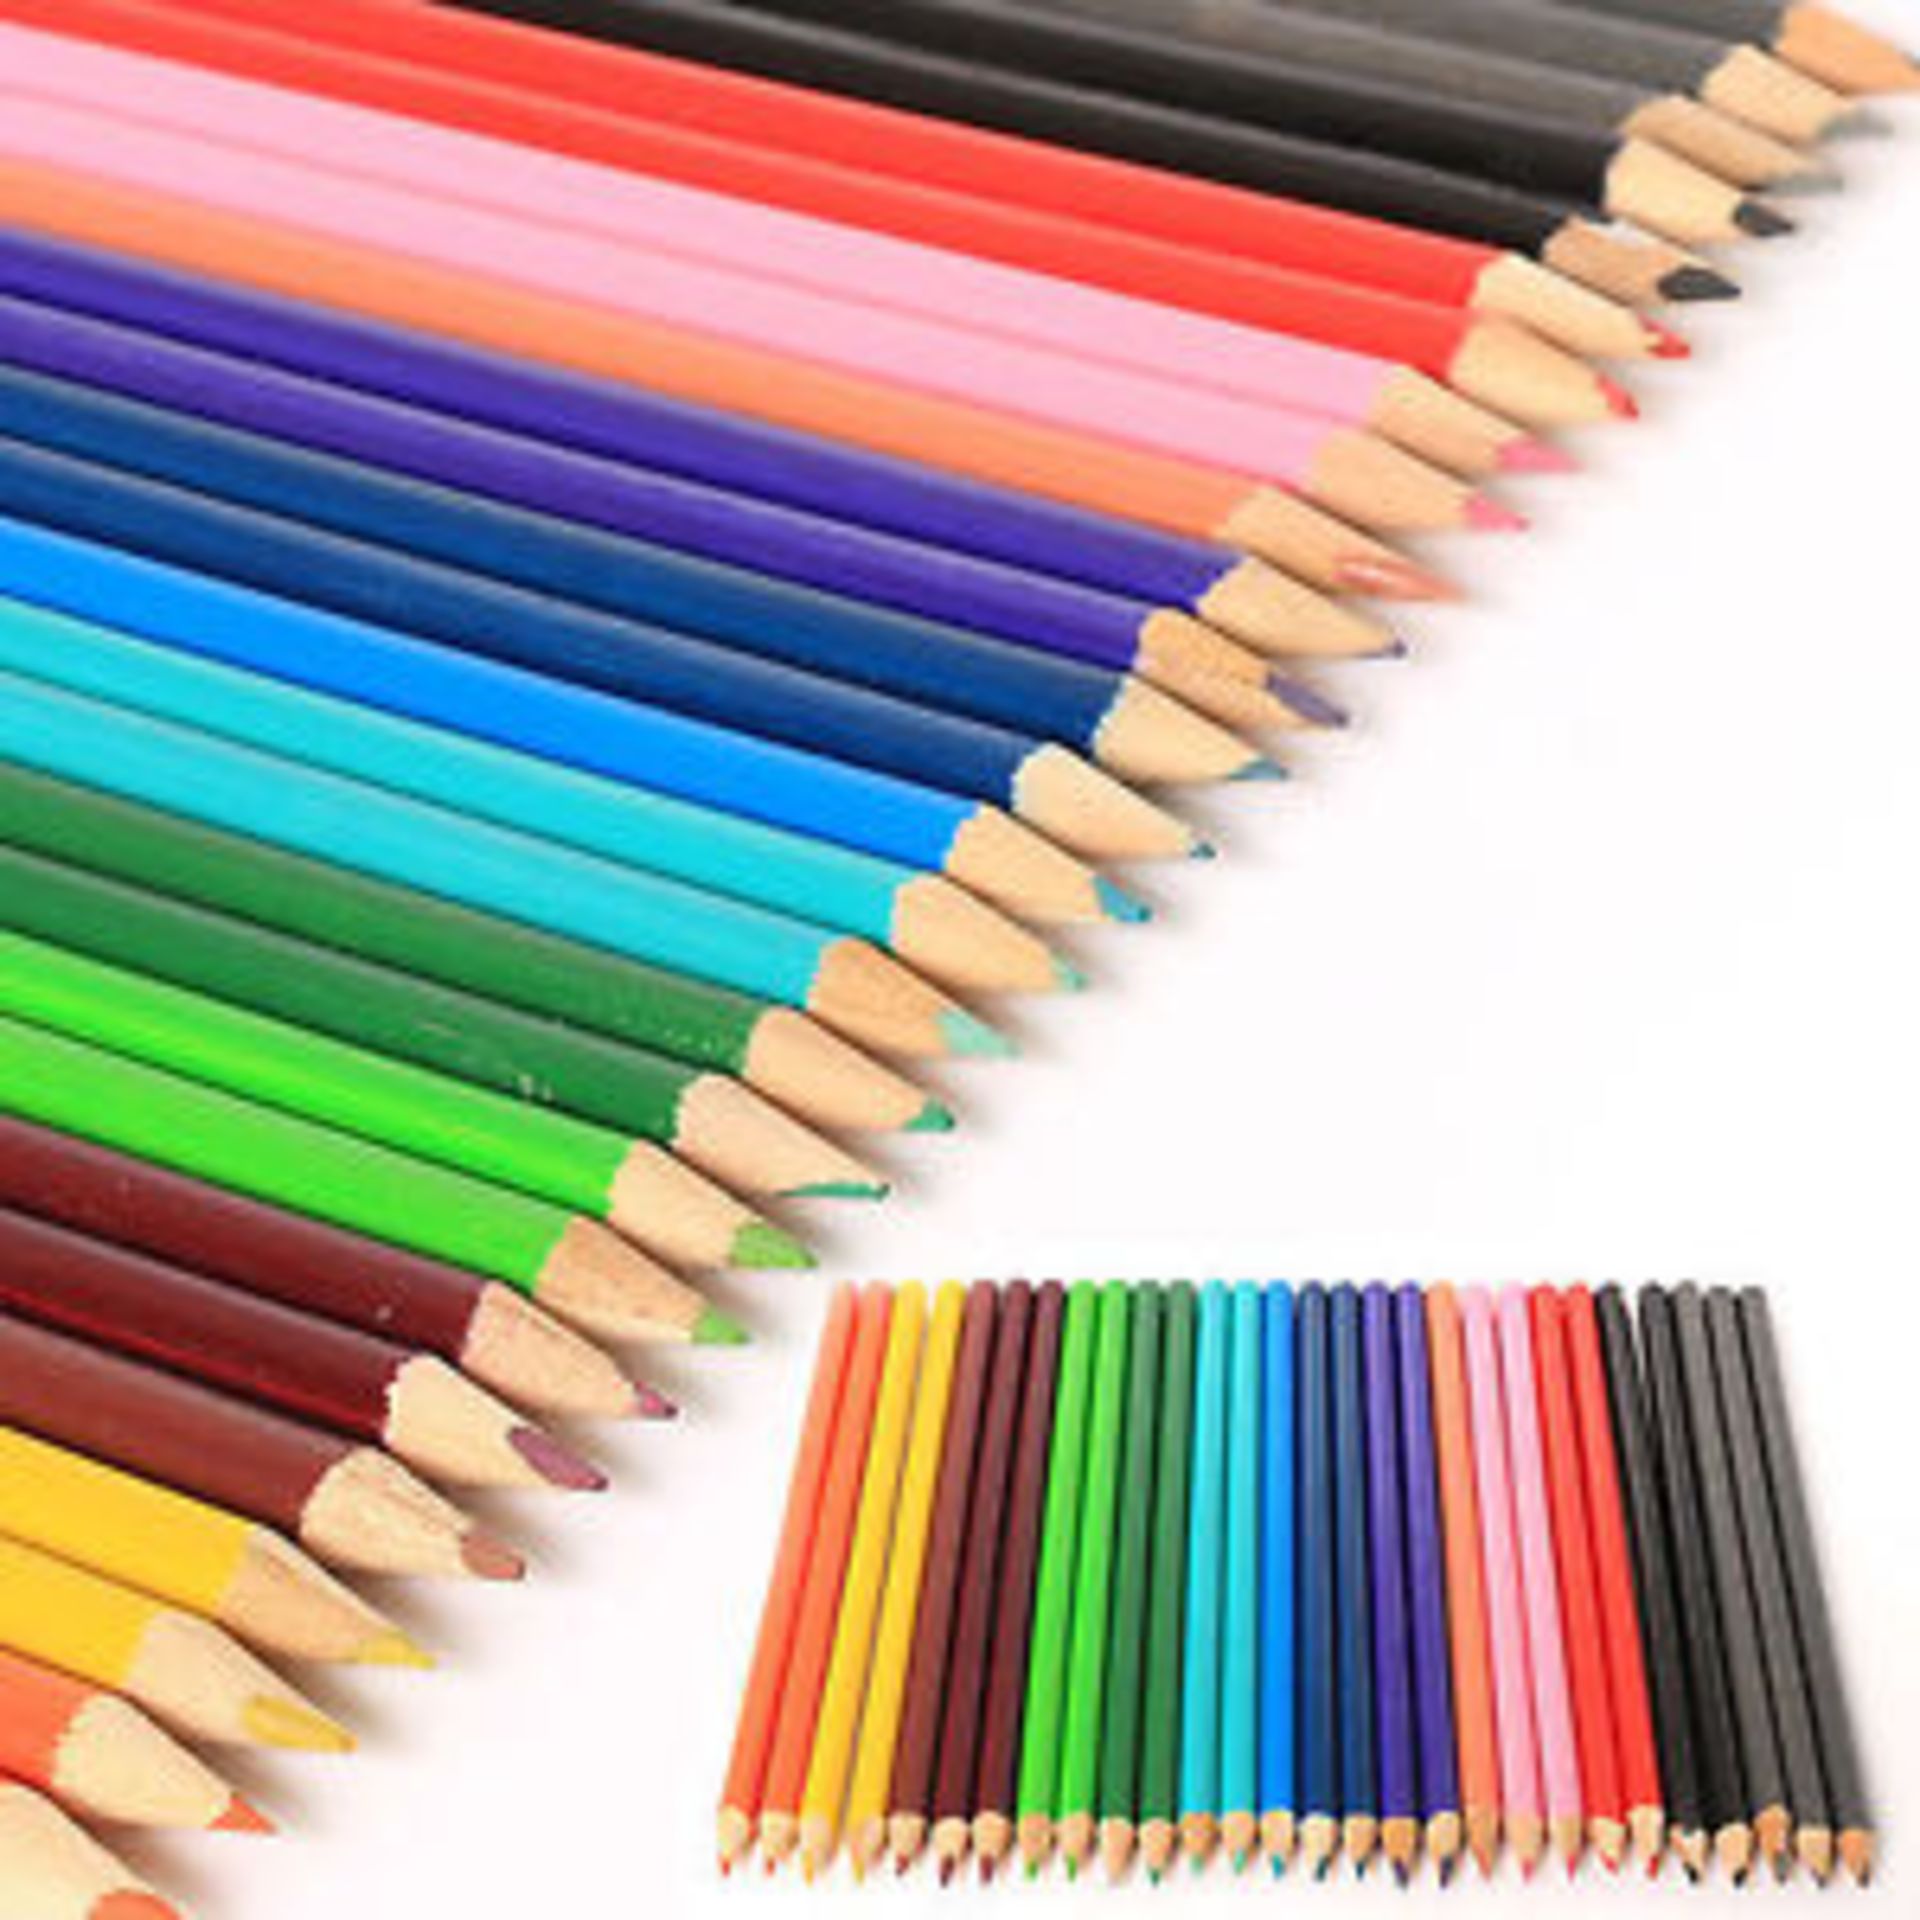 V *TRADE QTY* Brand New 30 Pack Professional Colouring Pencils - Artist Quality X 5 YOUR BID PRICE - Image 2 of 2